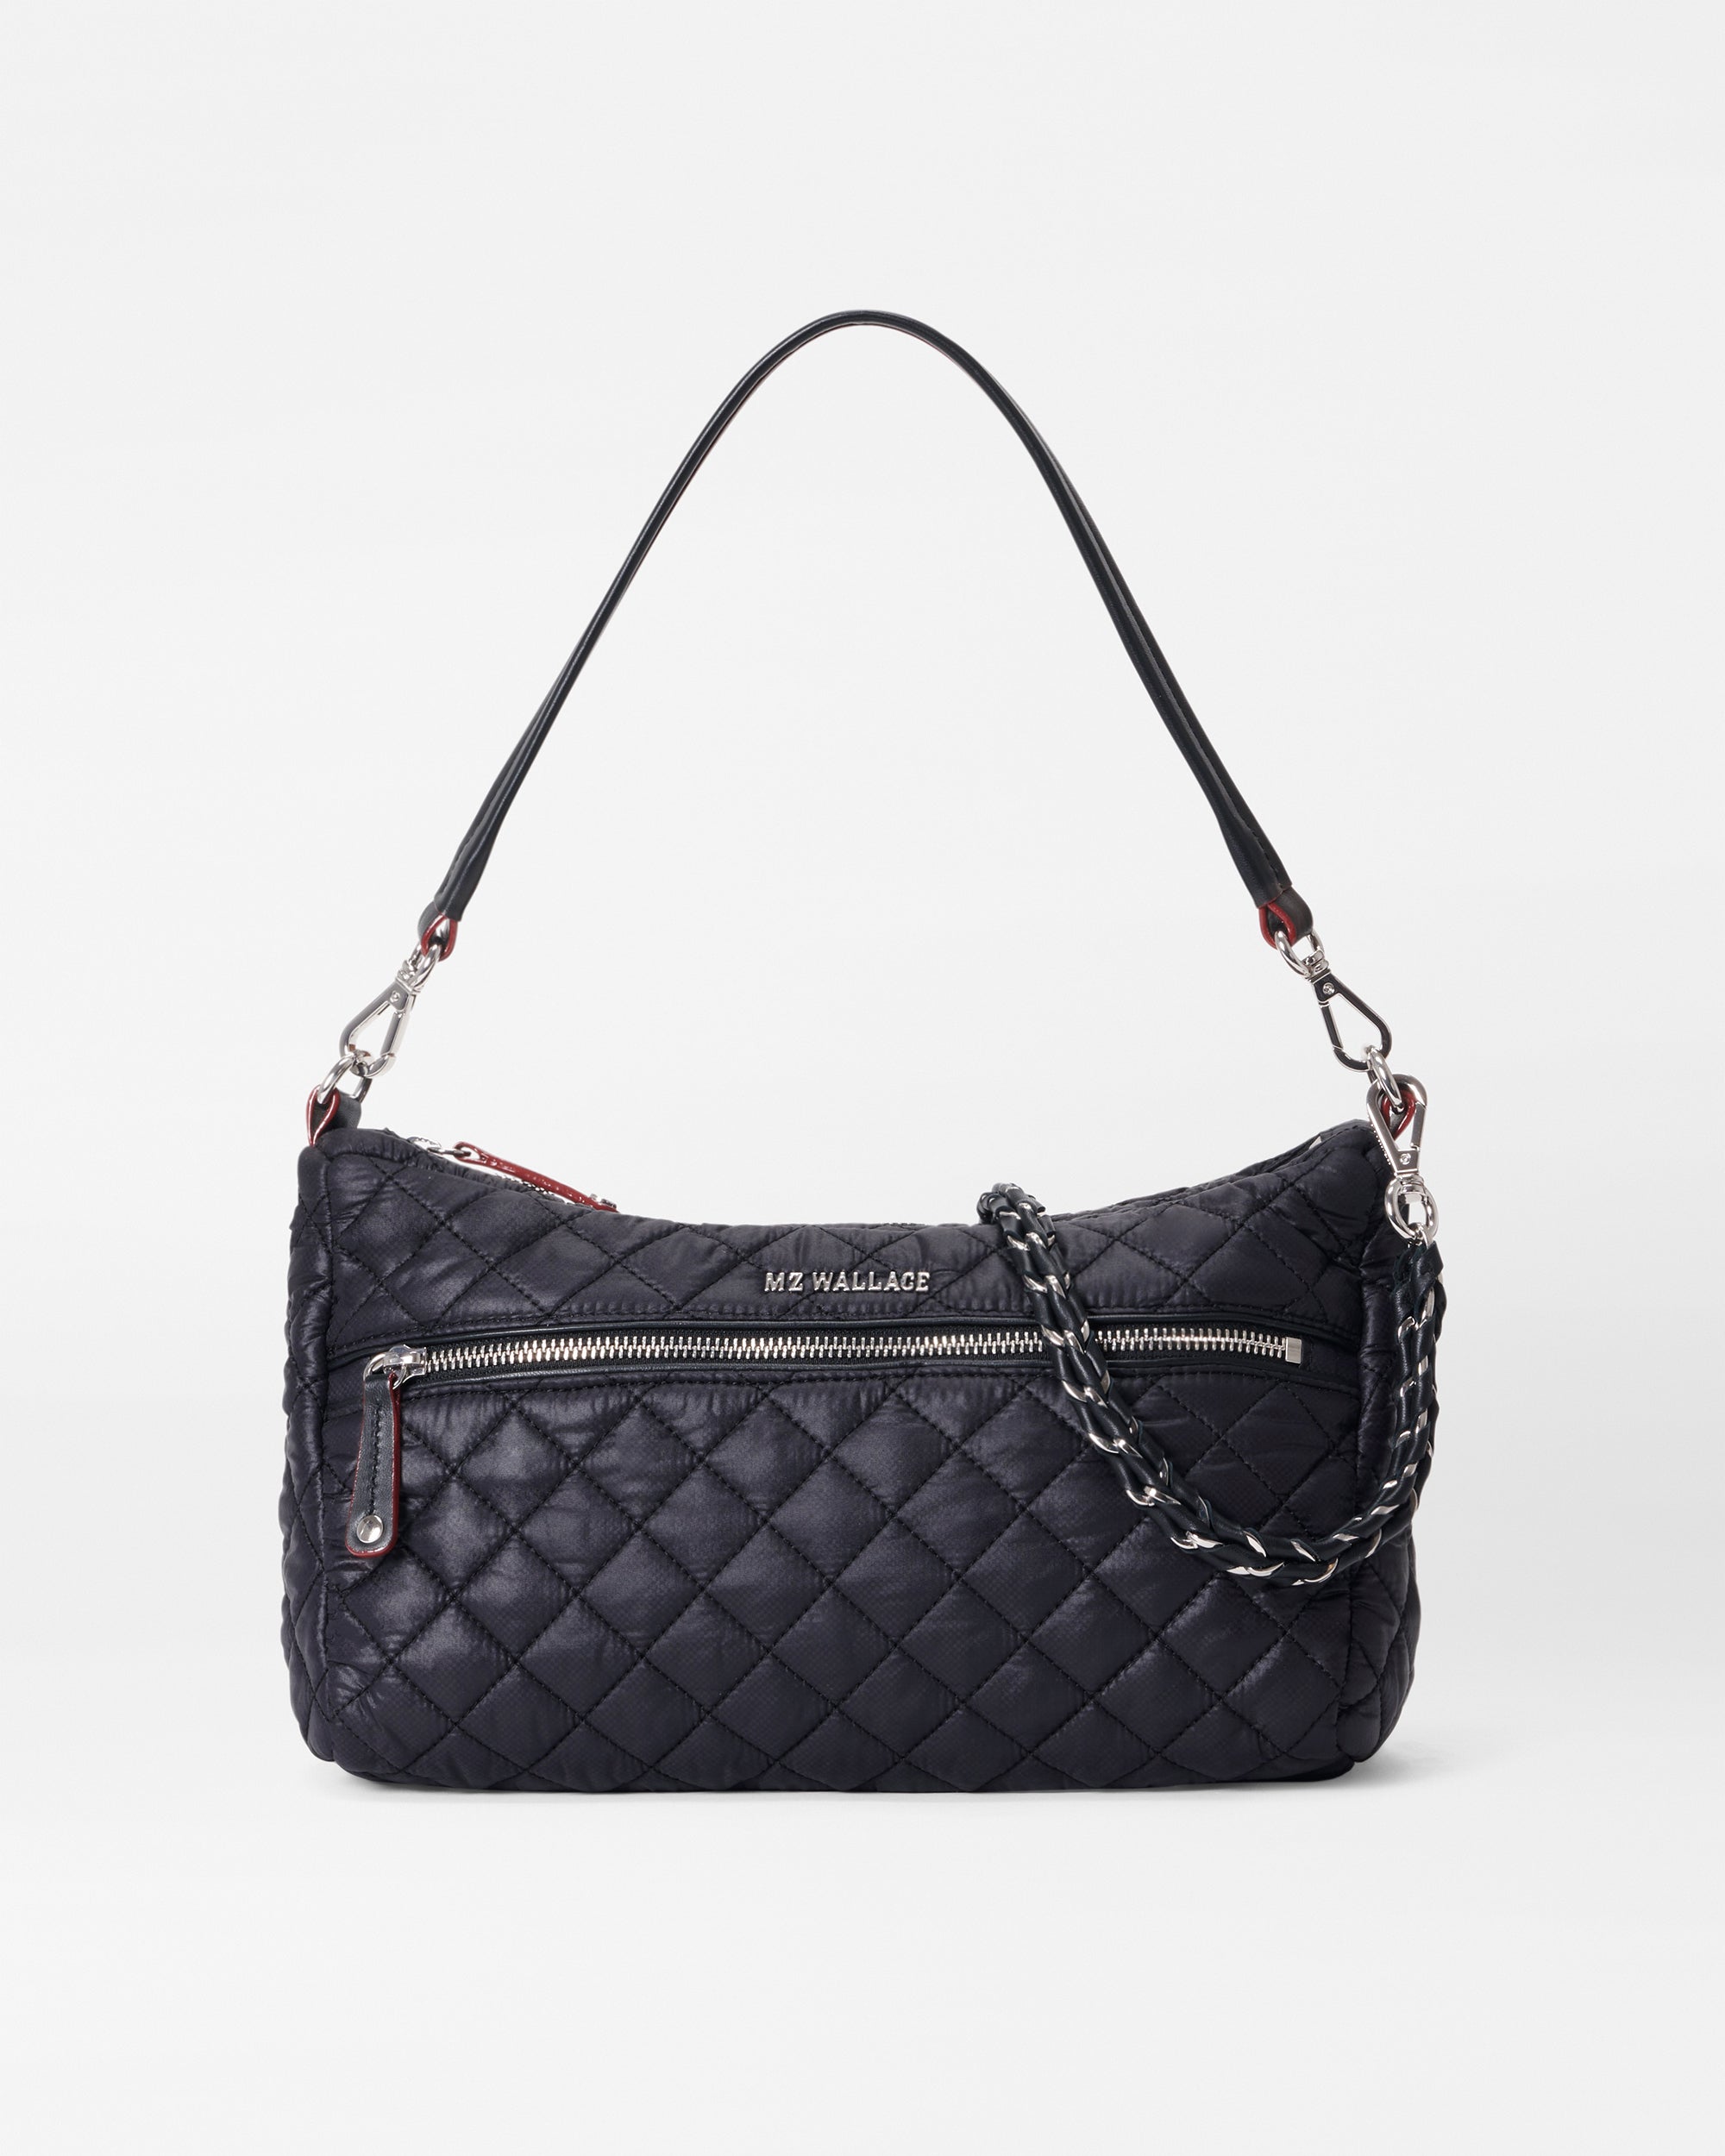 chanel quilted handbag black leather